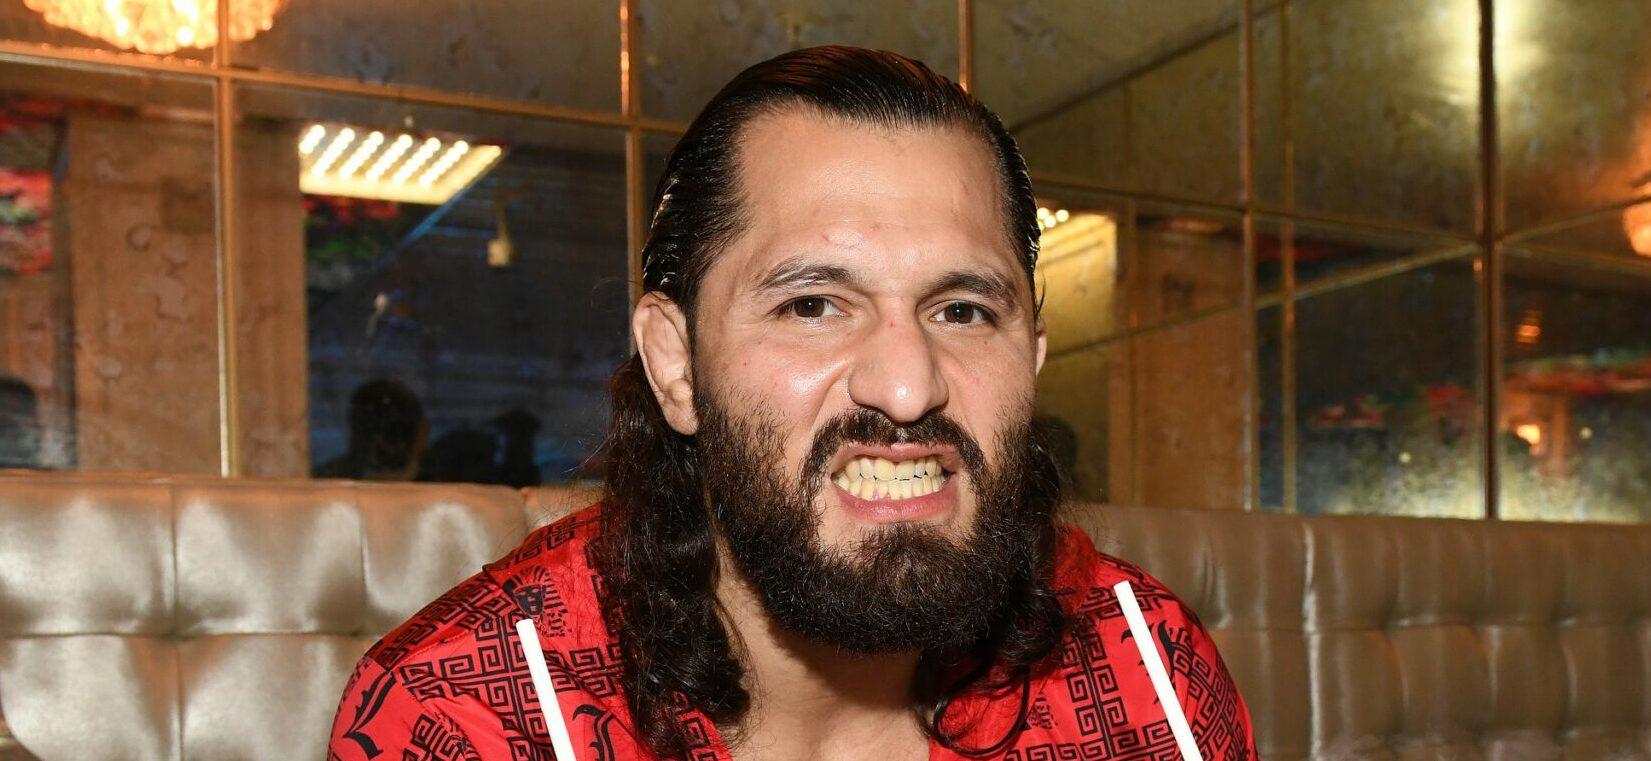 UFC Star Jorge Masvidal to Debut ‘BRKRZ’ at National Sports Collectors Convention